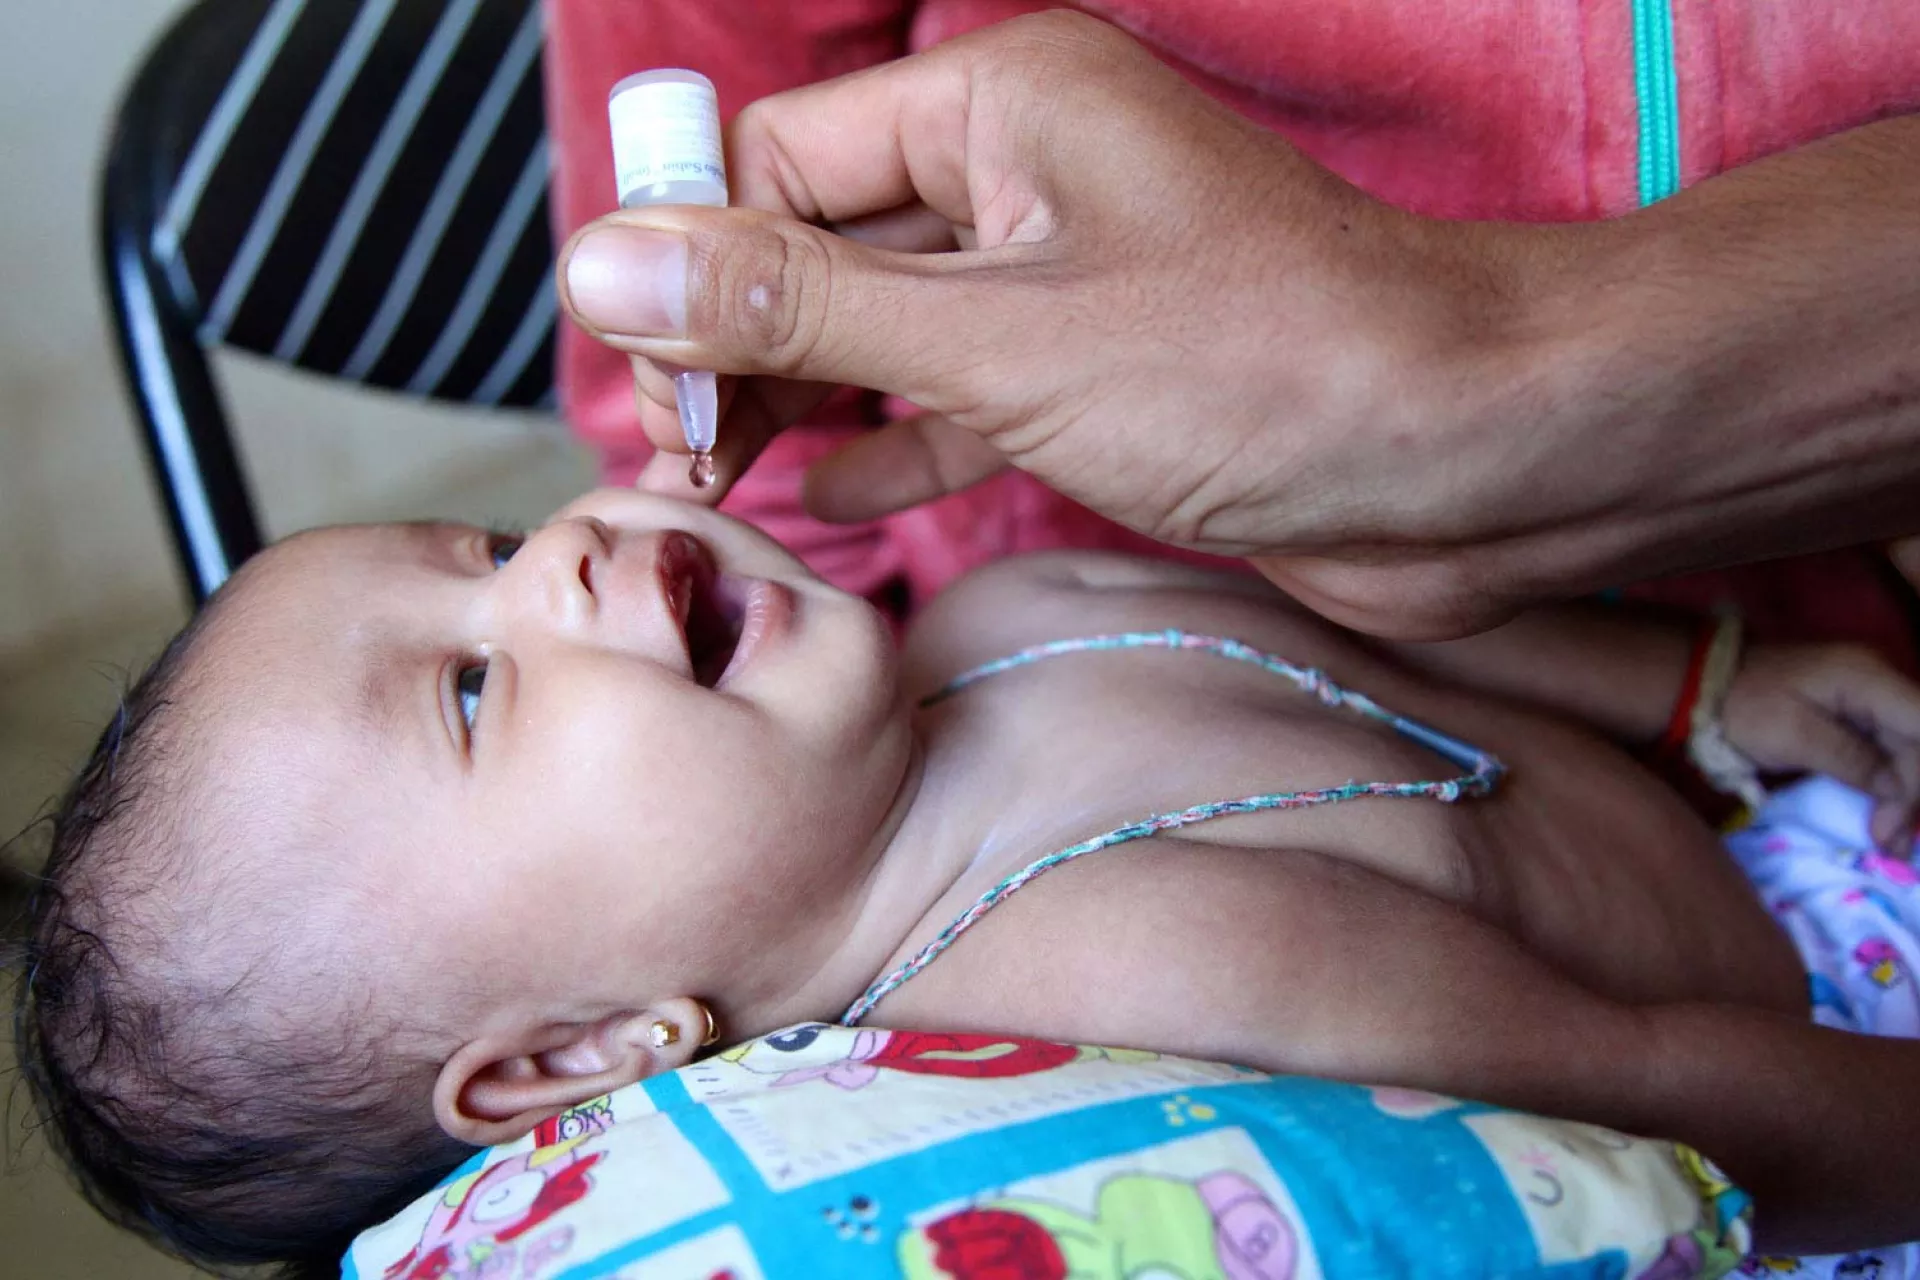 A child is administered an oral vaccine during a routine immunization session at the health centre in the village of Preak Krabao, Kang Meas District, Cambodia